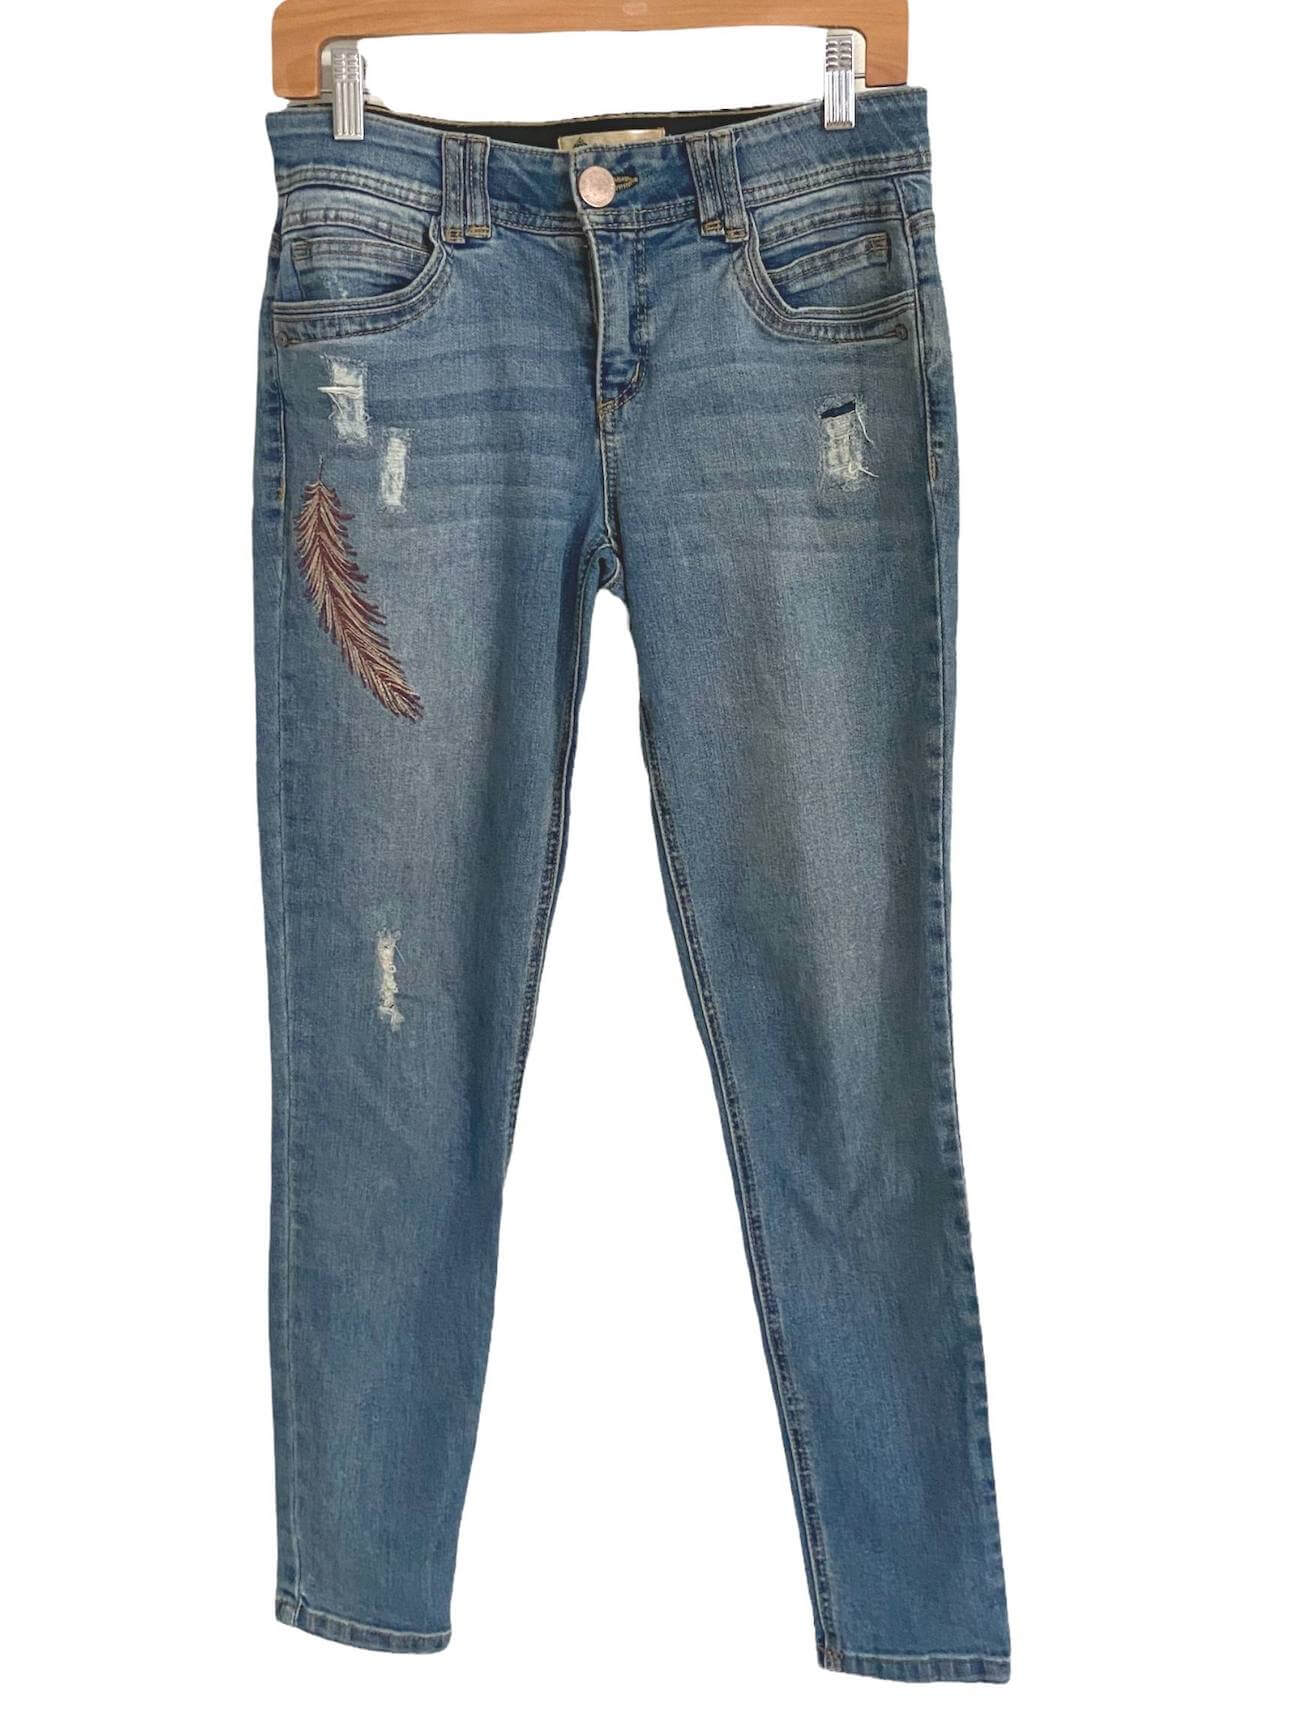 Warm Autumn DEMOCRACY embroidered feather jeans